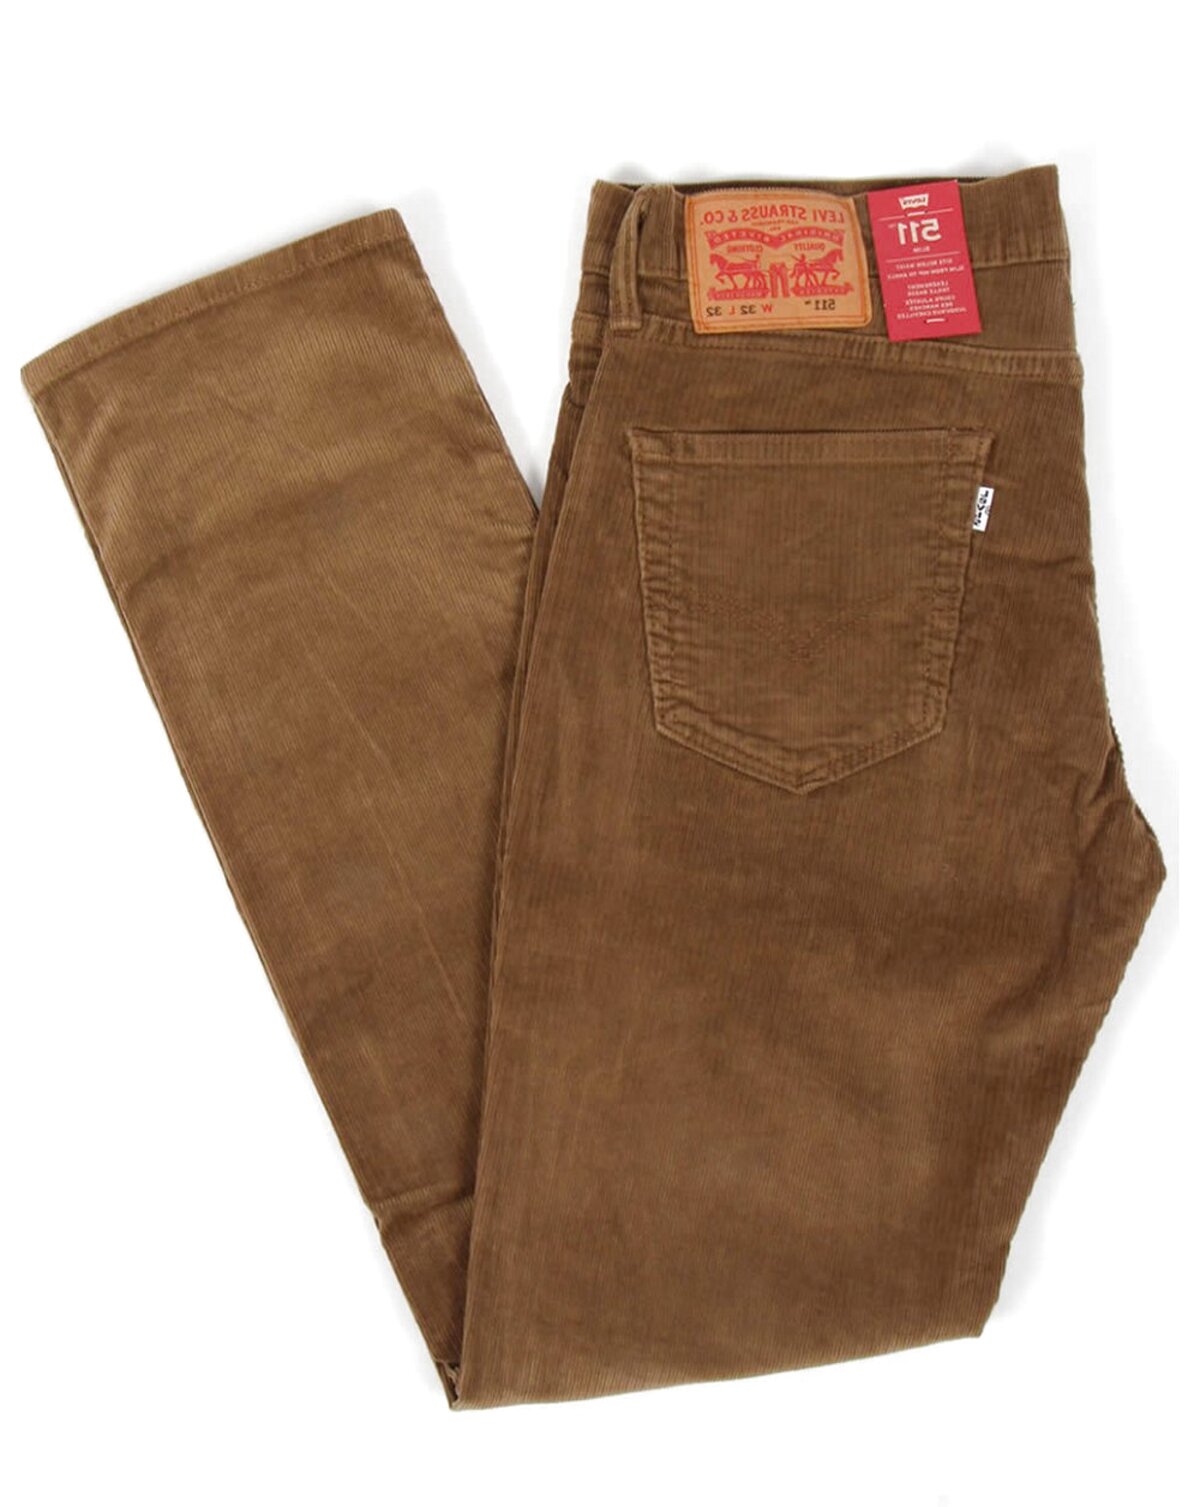 Levis Made  Crafted 502 Trousers  Demitasse Cord  Always in Colour